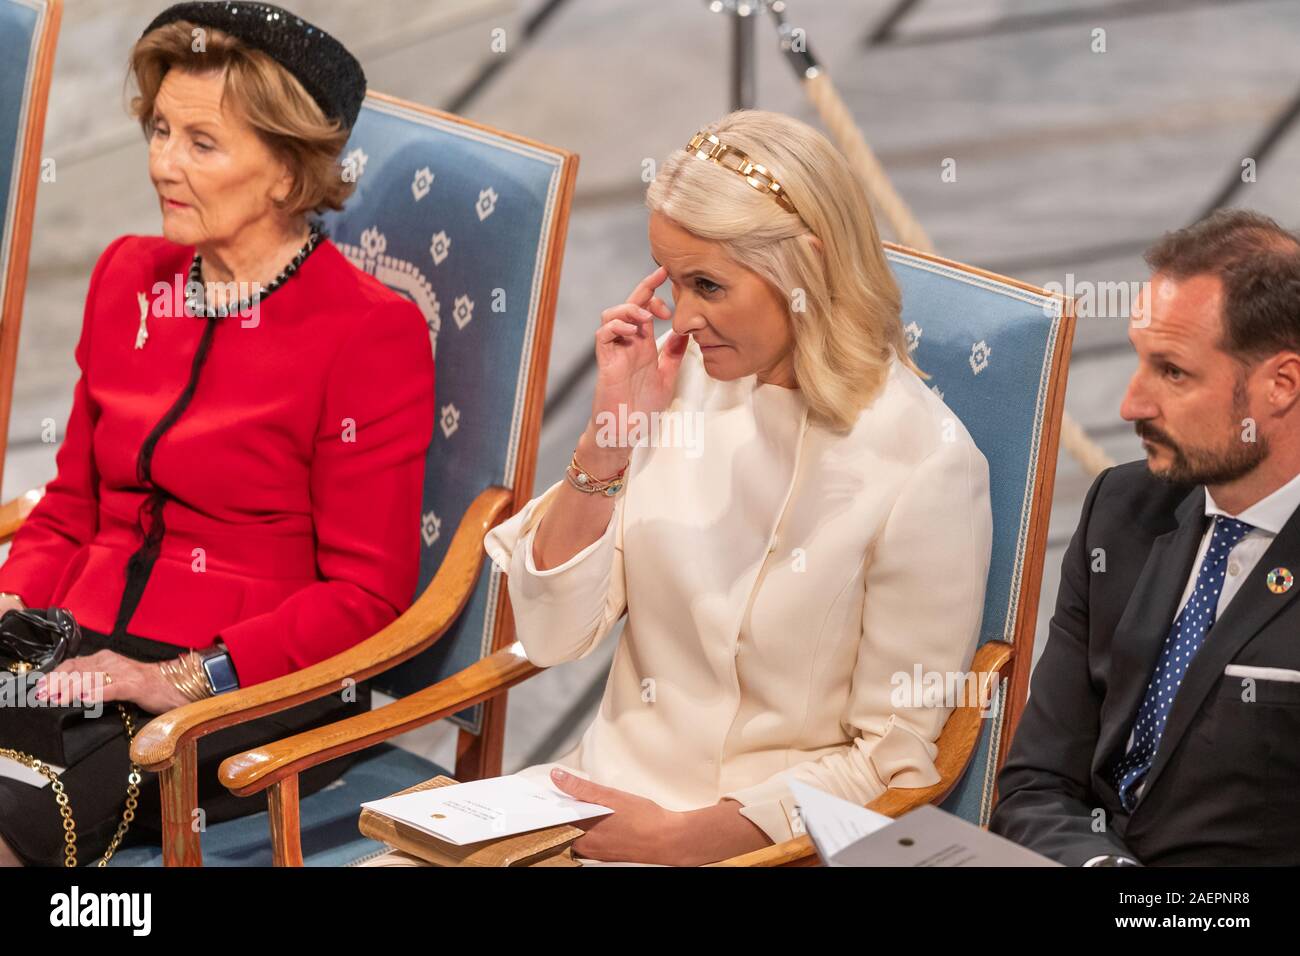 Oslo, Norway. 10th Dec 2019.  Her Royal Highness The Crown Princess Mette Marit of Norway listening attentively during the acceptance speech by laureate Abiy Ahamd Prime Minister of Ethiopia at the Nobel Peace Prize Ceremony at the Oslo City Hall in Oslo, Norway Credit: Nigel Waldron/Alamy Live News Stock Photo